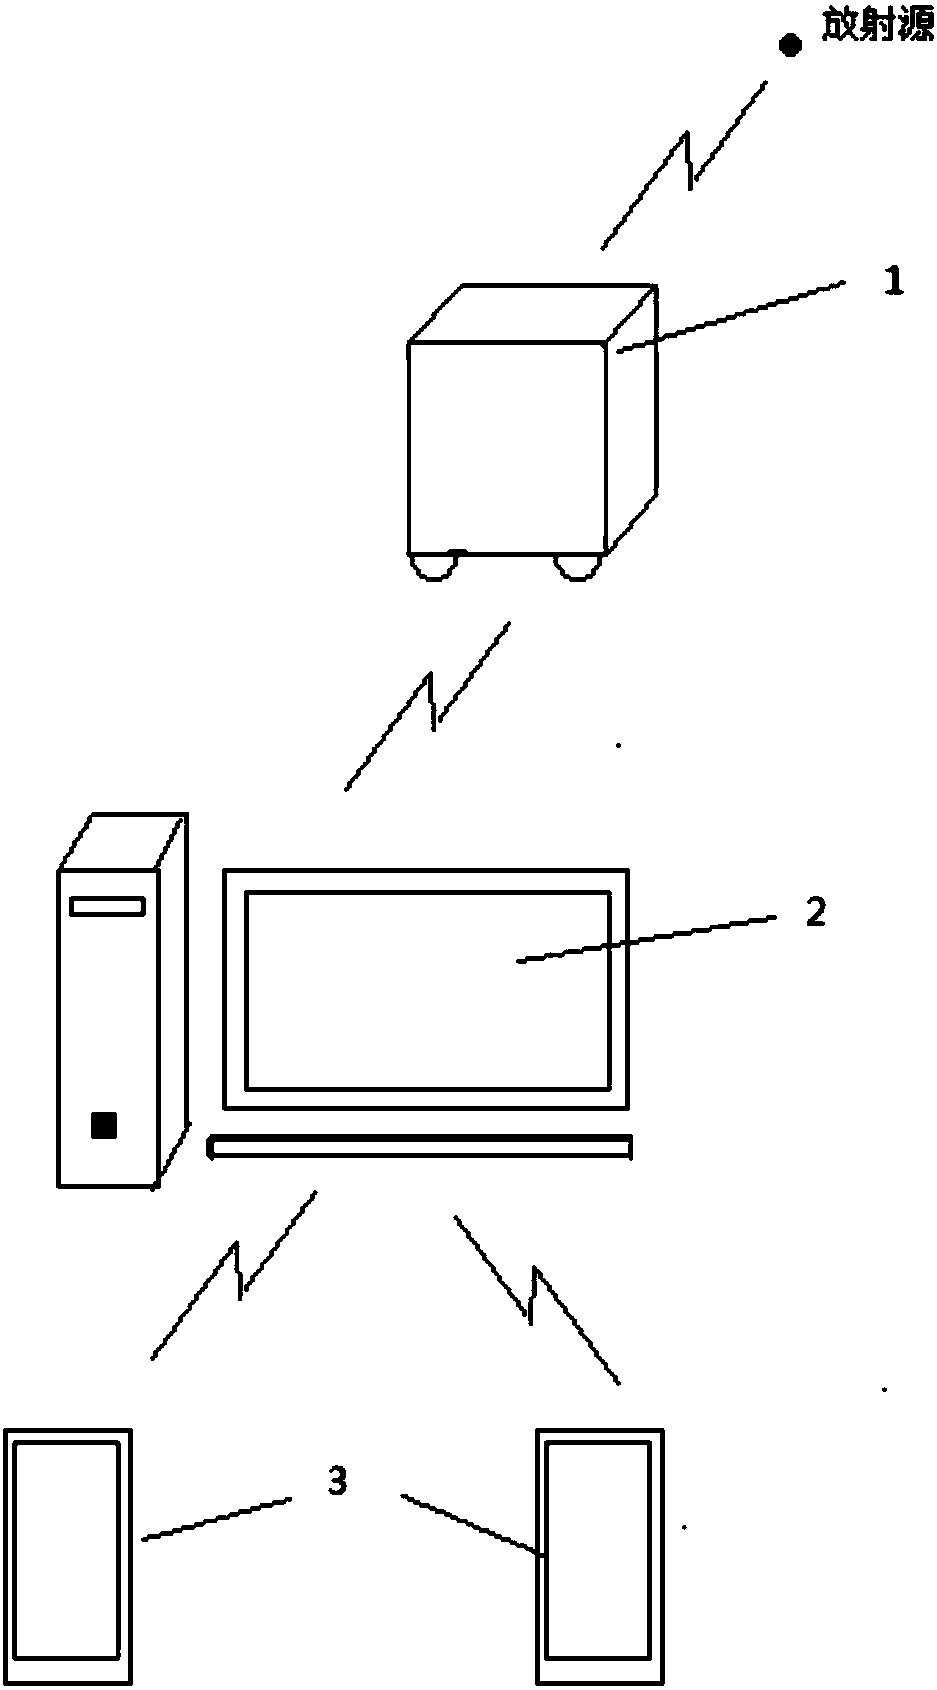 Radioactive source monitoring device and method